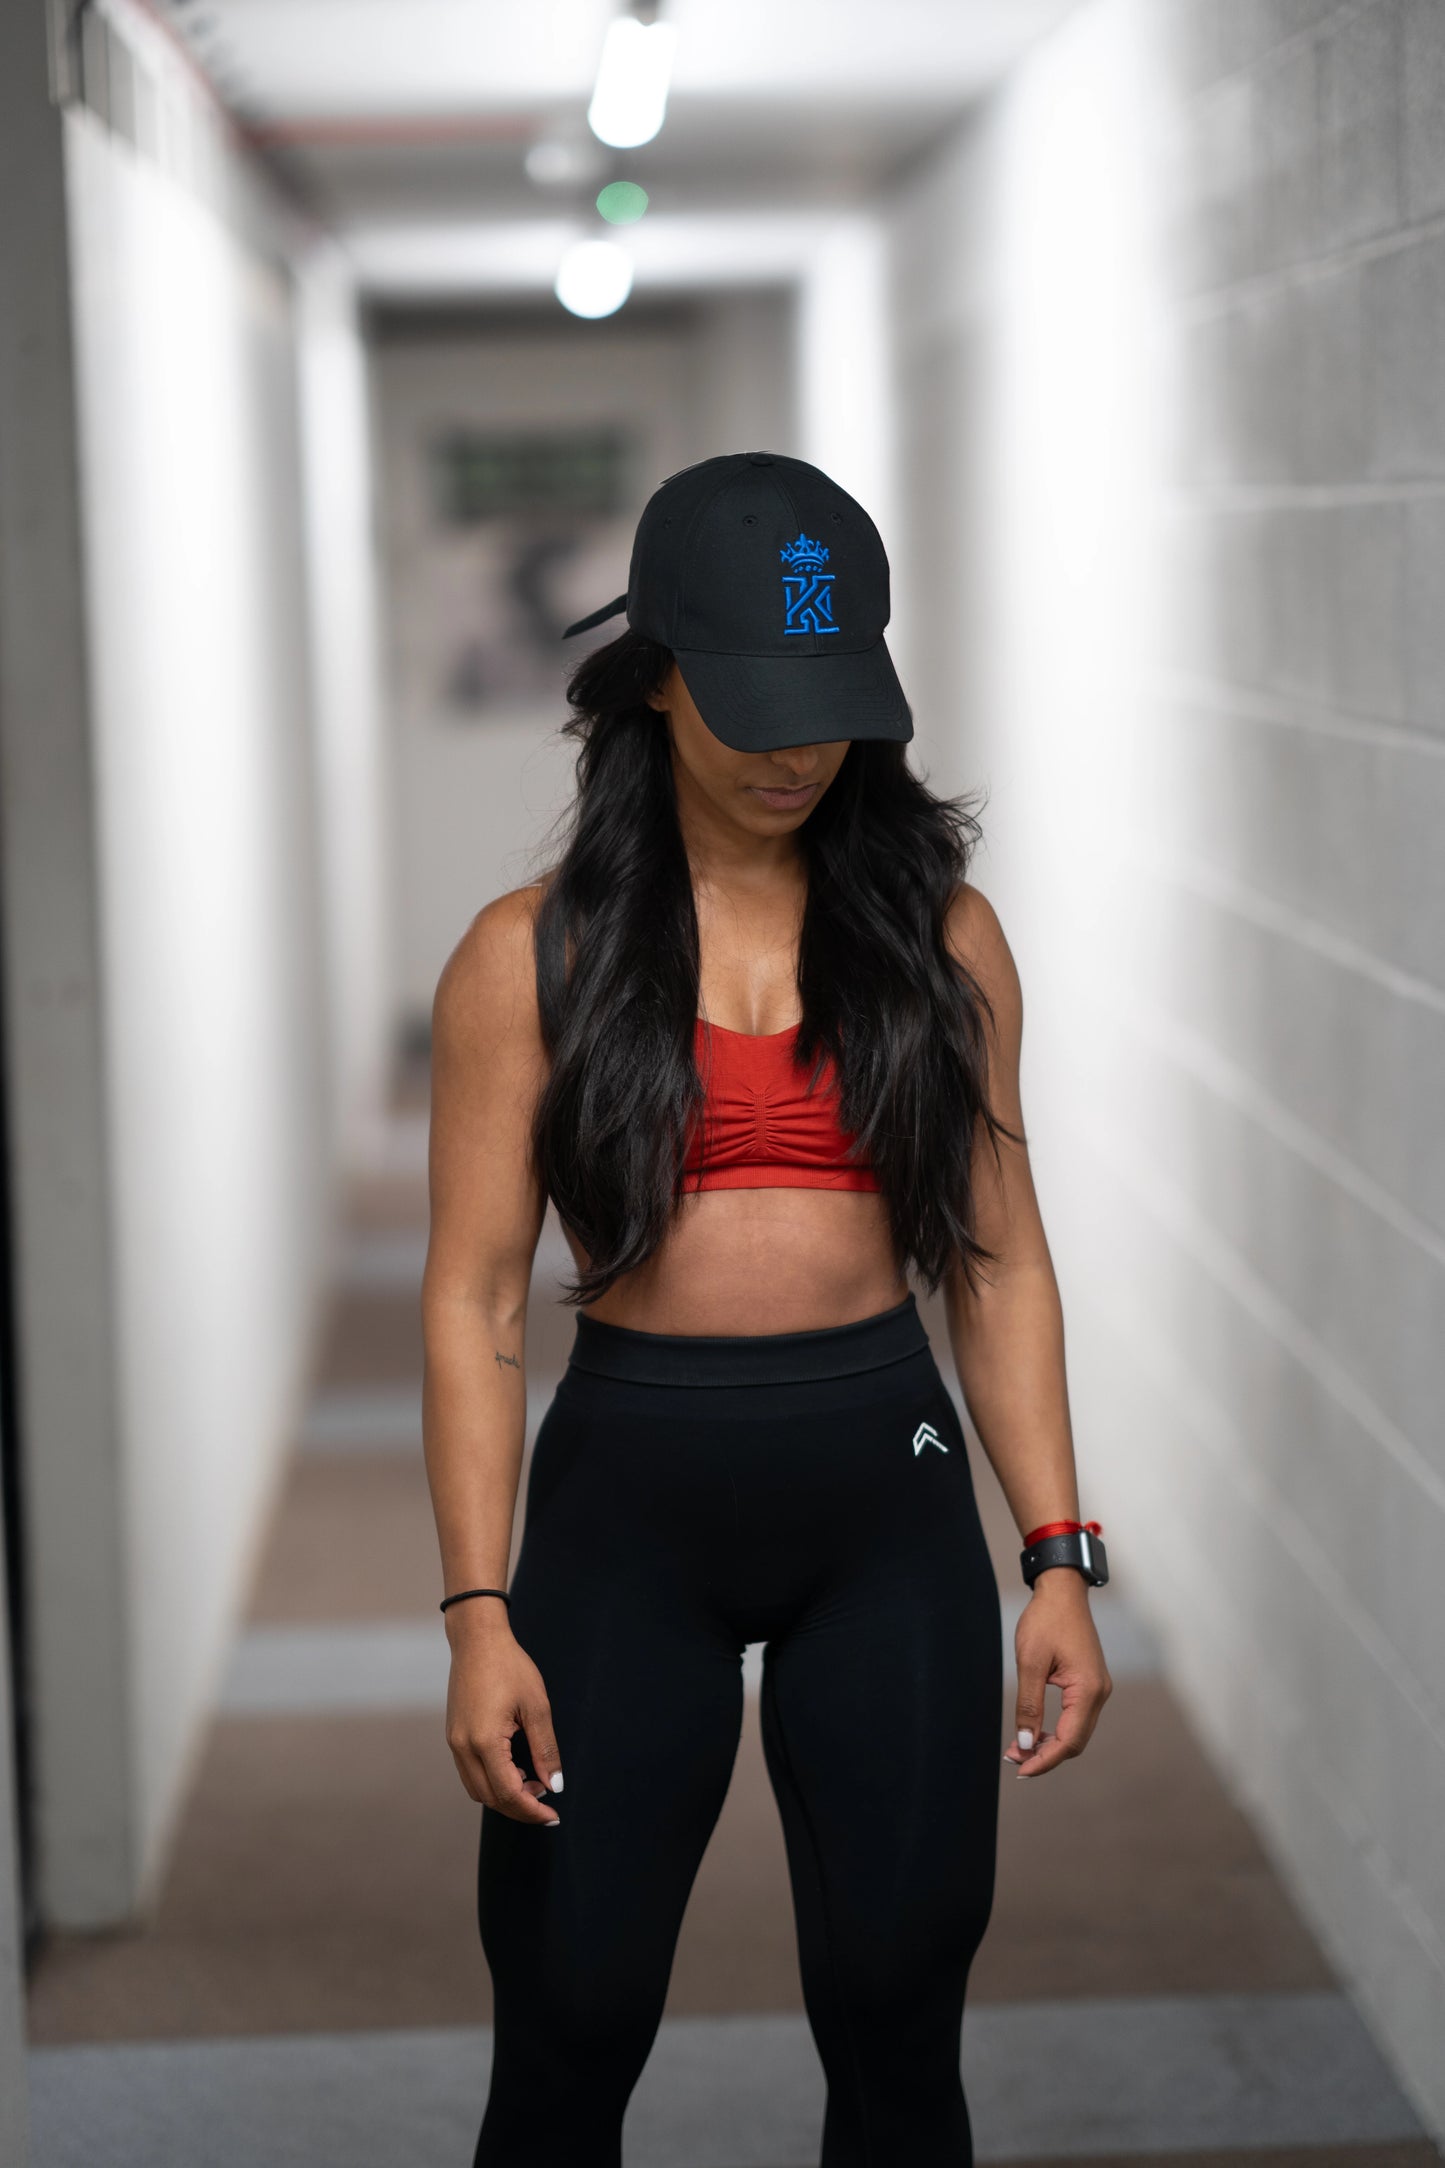 KingsGym Cool Blue Cap On Lady